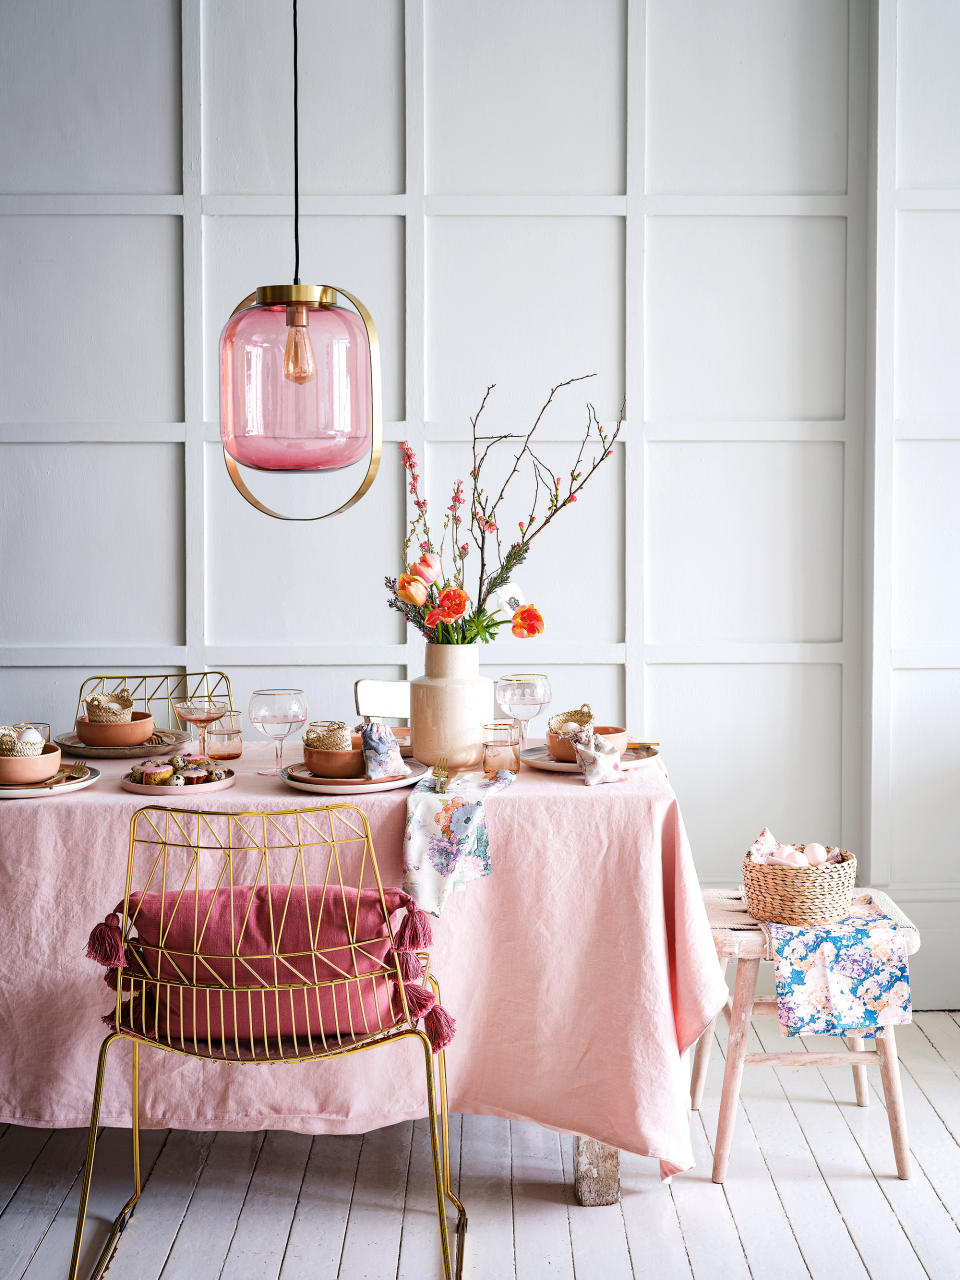 16. Pair pink with soft grey for an elegant dining space